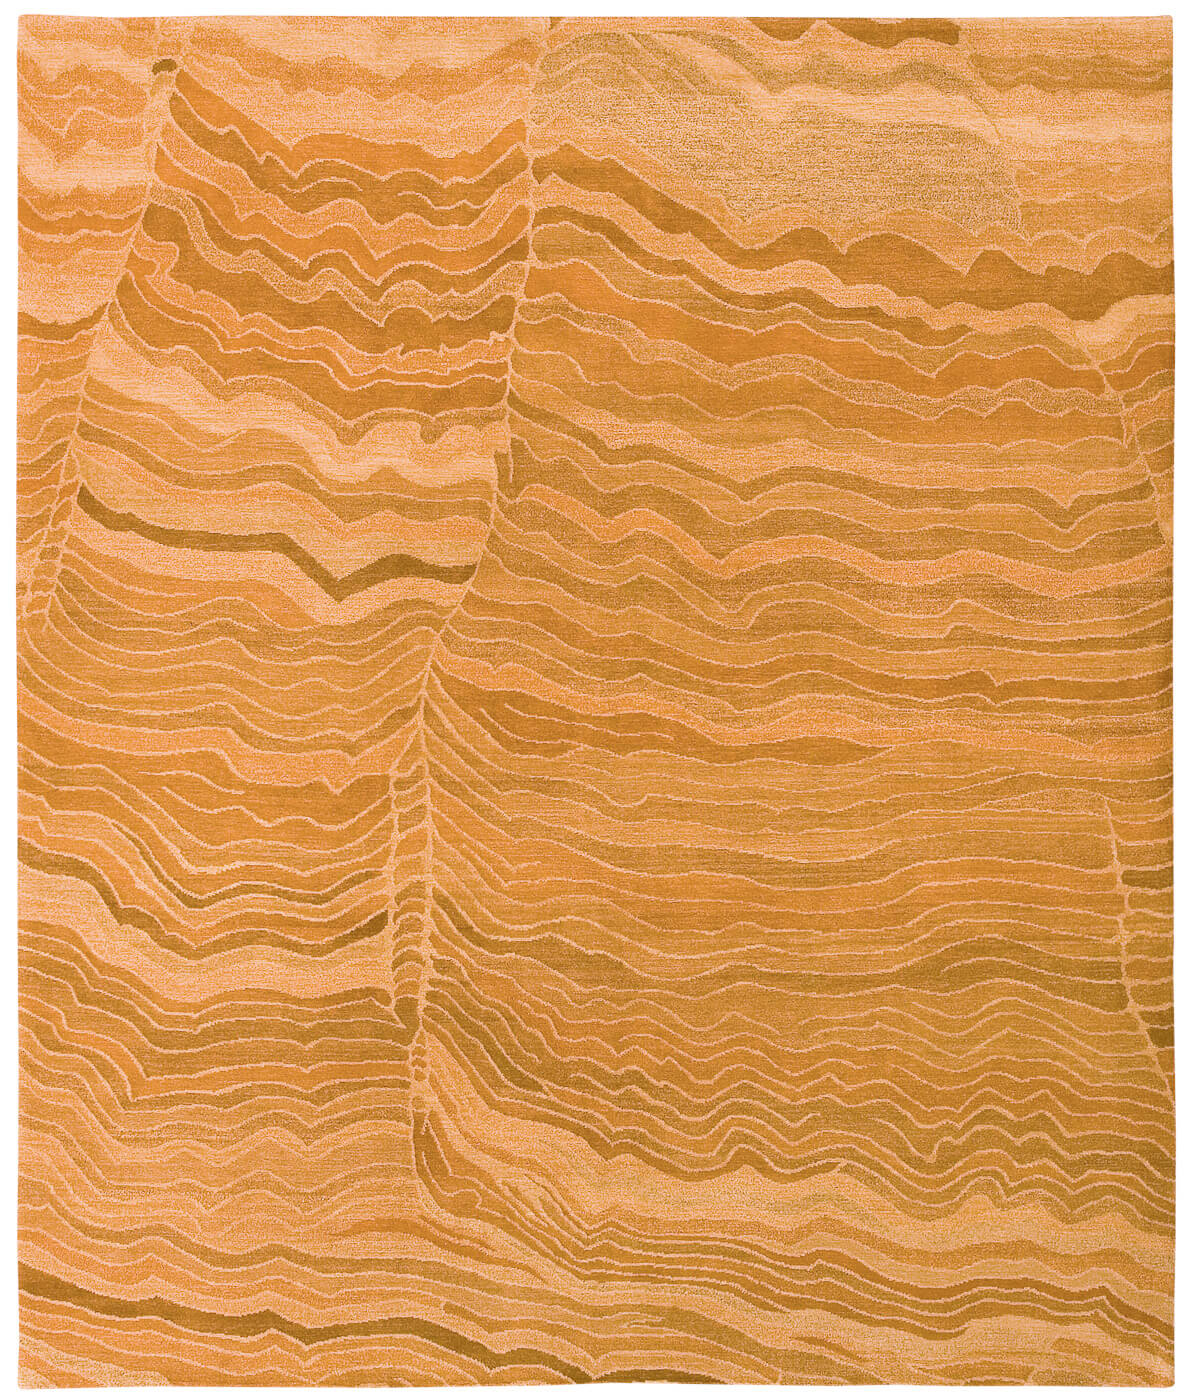 Hand-woven Wool Gold Luxury Rug ☞ Size: 250 x 300 cm